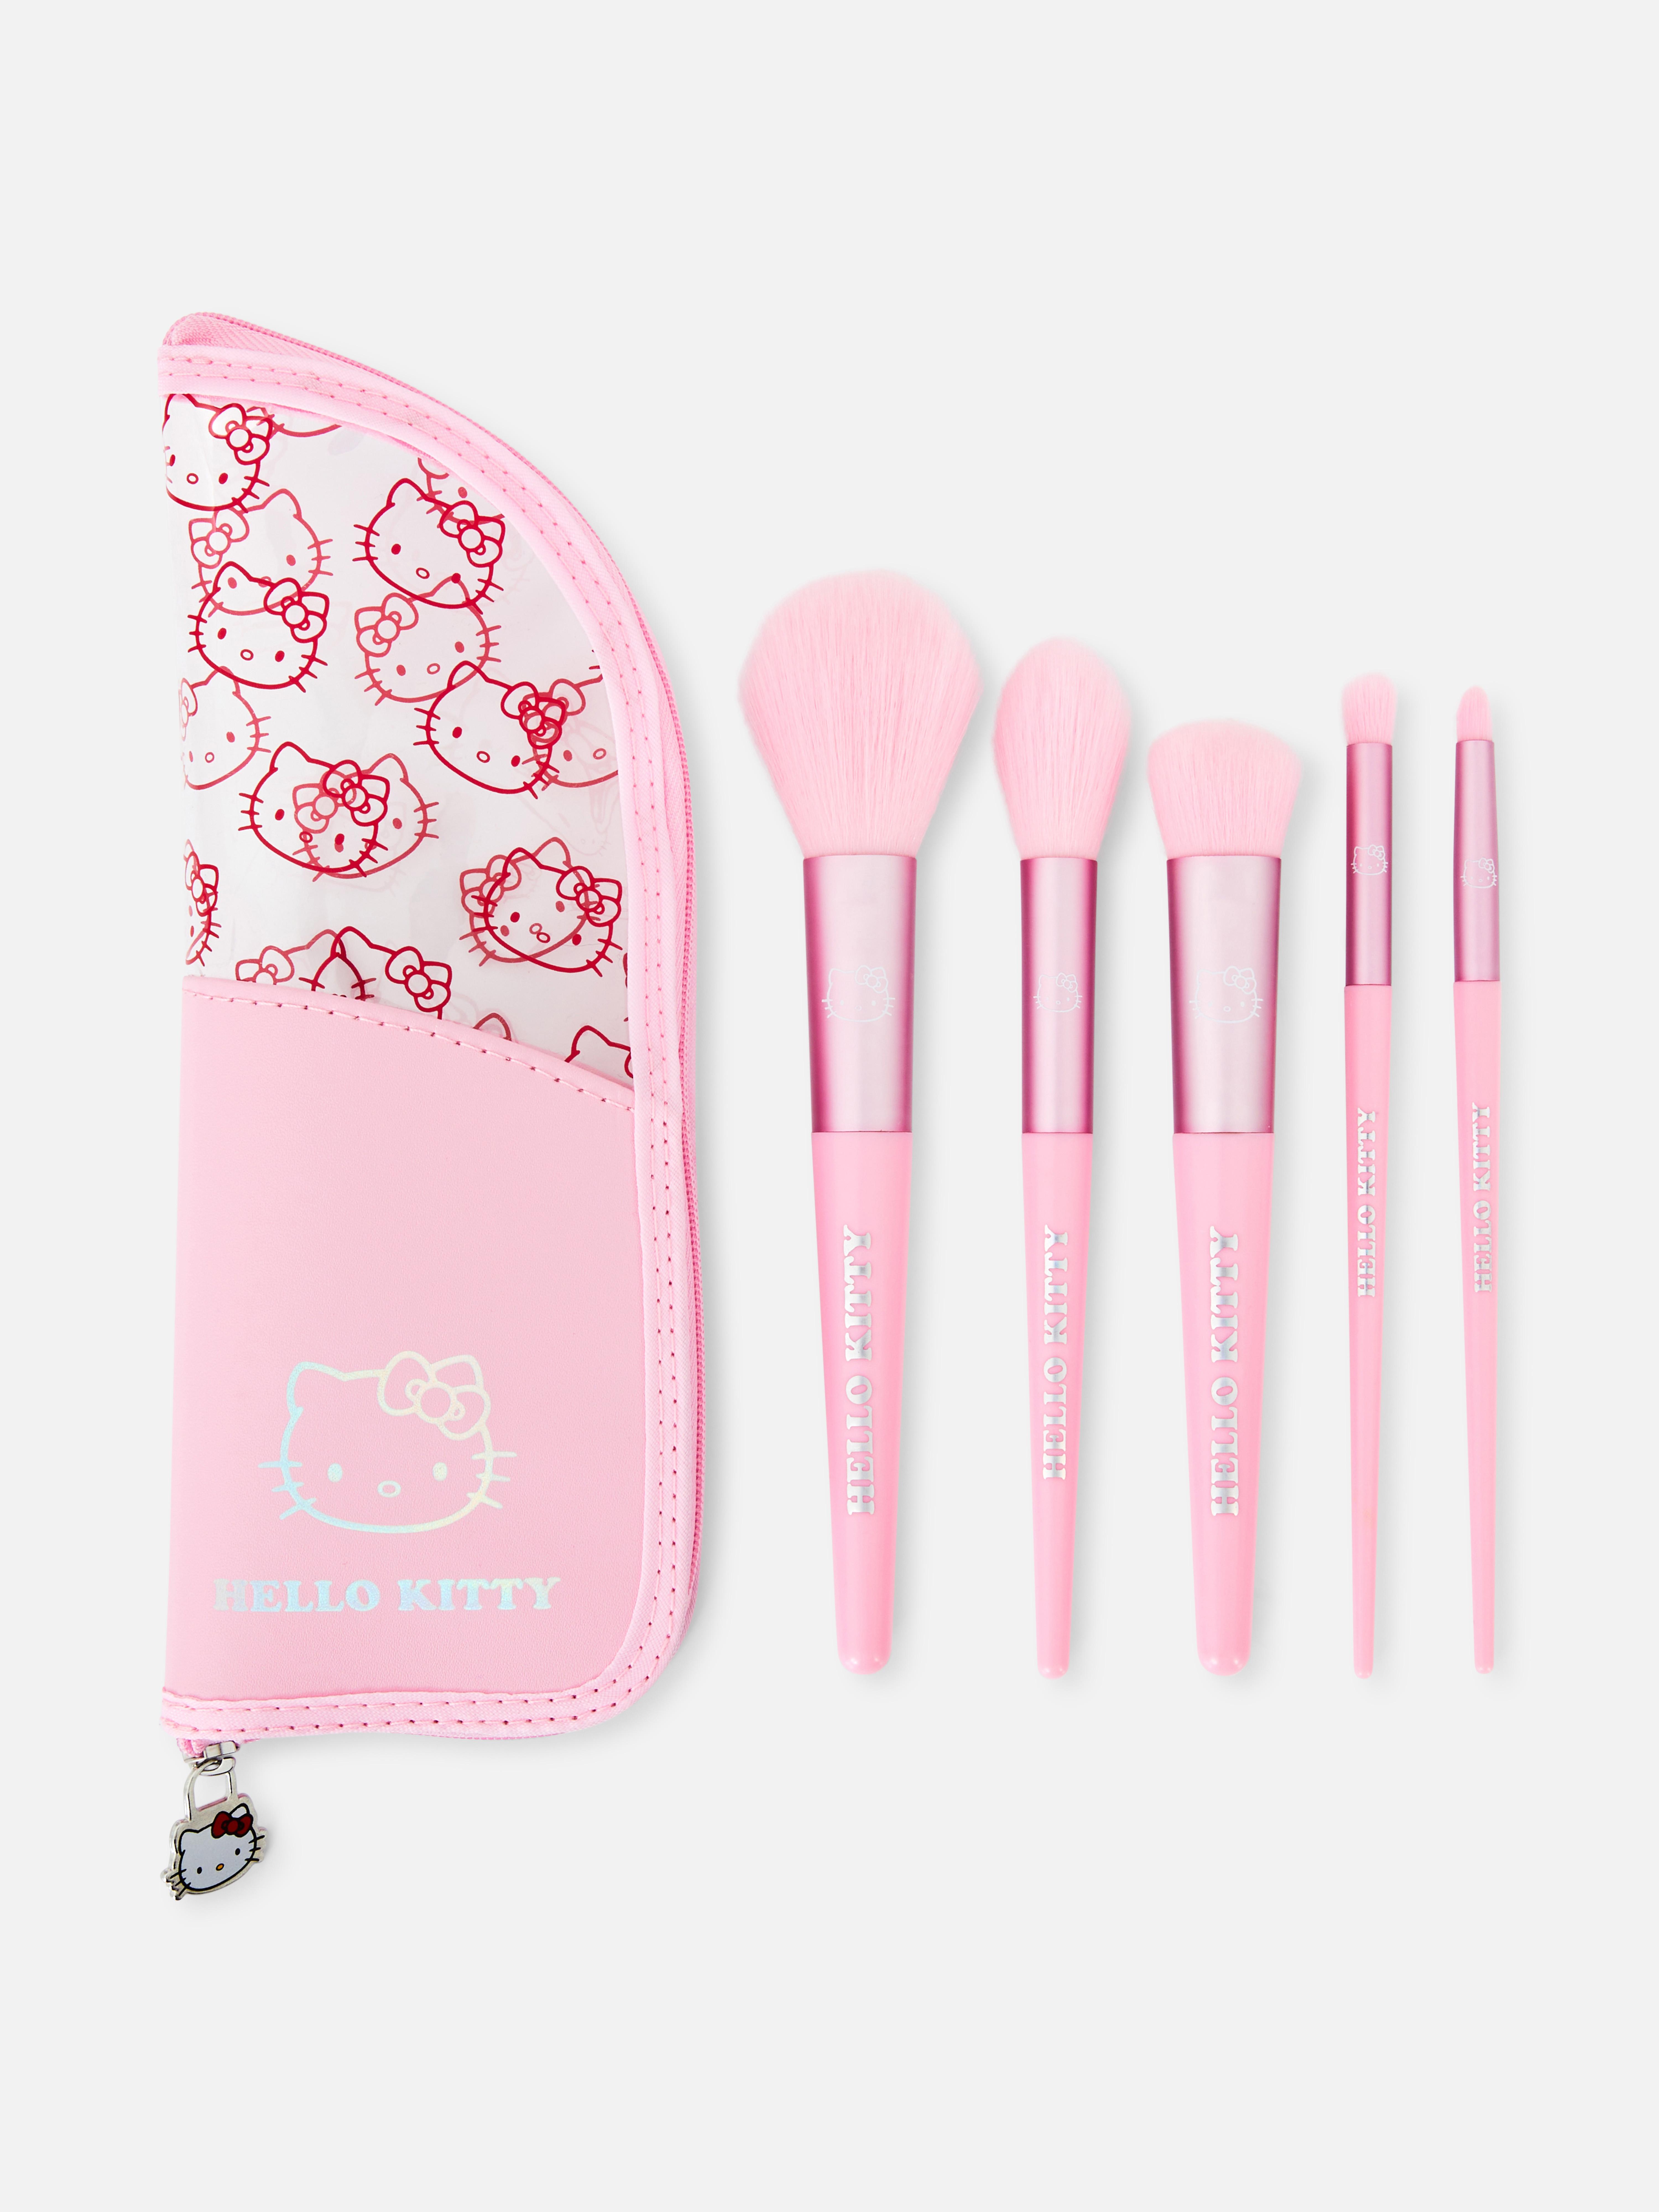 „Hello Kitty“ Make-up-Pinselset, 5-teilig